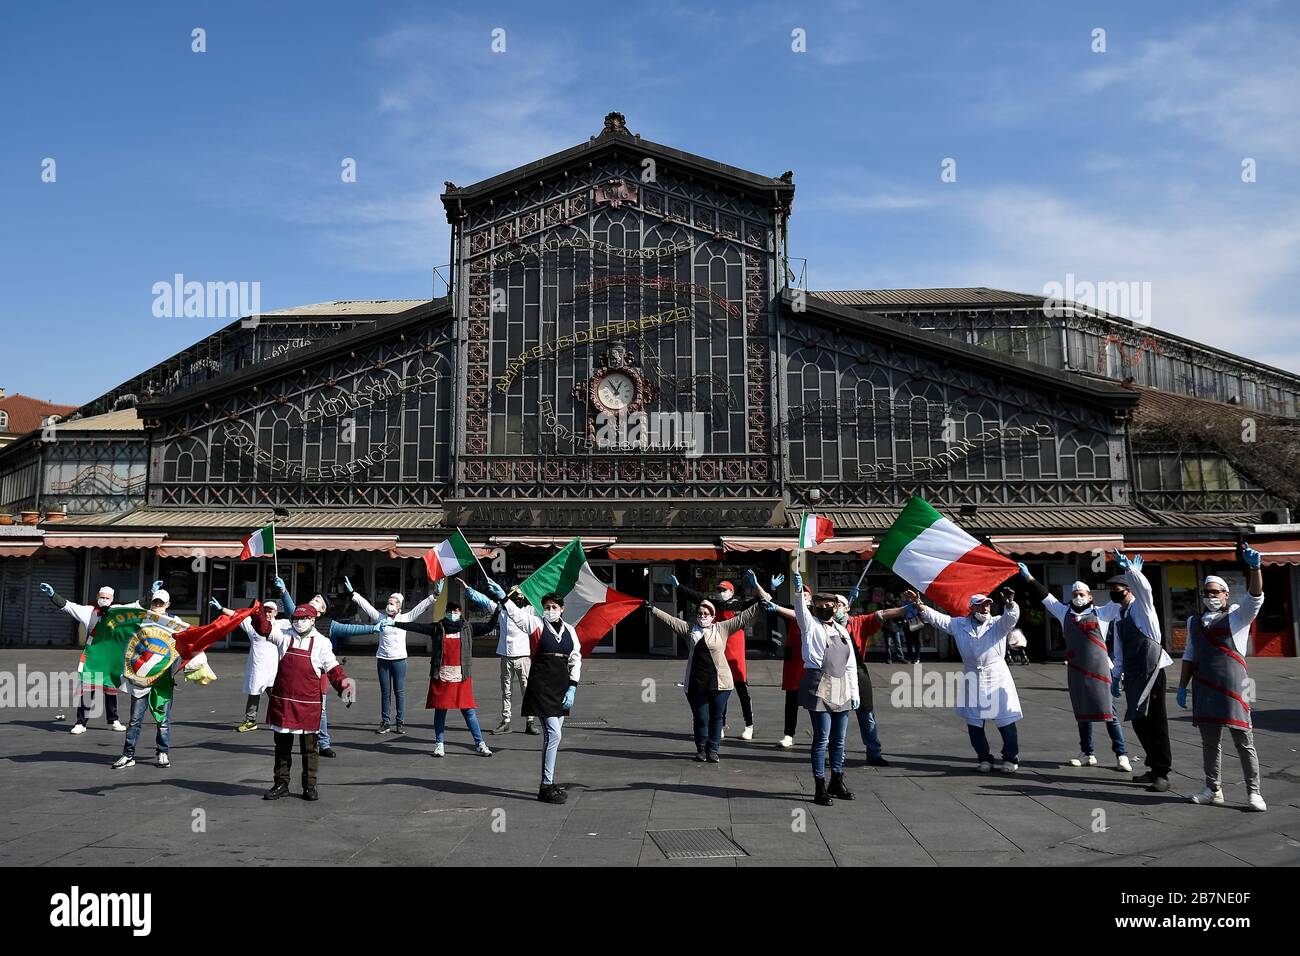 TURIN, ITALY - March 17, 2020: Some merchants from the Porta Palazzo market improvise a flash mob by singing the Italian anthem and waving Italian flags to celebrate the 159th anniversary of the unification of Italy. Merchants stay at a safe distance to comply with measures to prevent the spread of coronavirus. The Italian government imposed unprecedented restrictions to halt the spread of COVID-19 coronavirus outbreak, among other measures people movements are allowed only for work, for buying essential goods and for health reasons. (Photo by Nicolò Campo/Sipa USA) Stock Photo